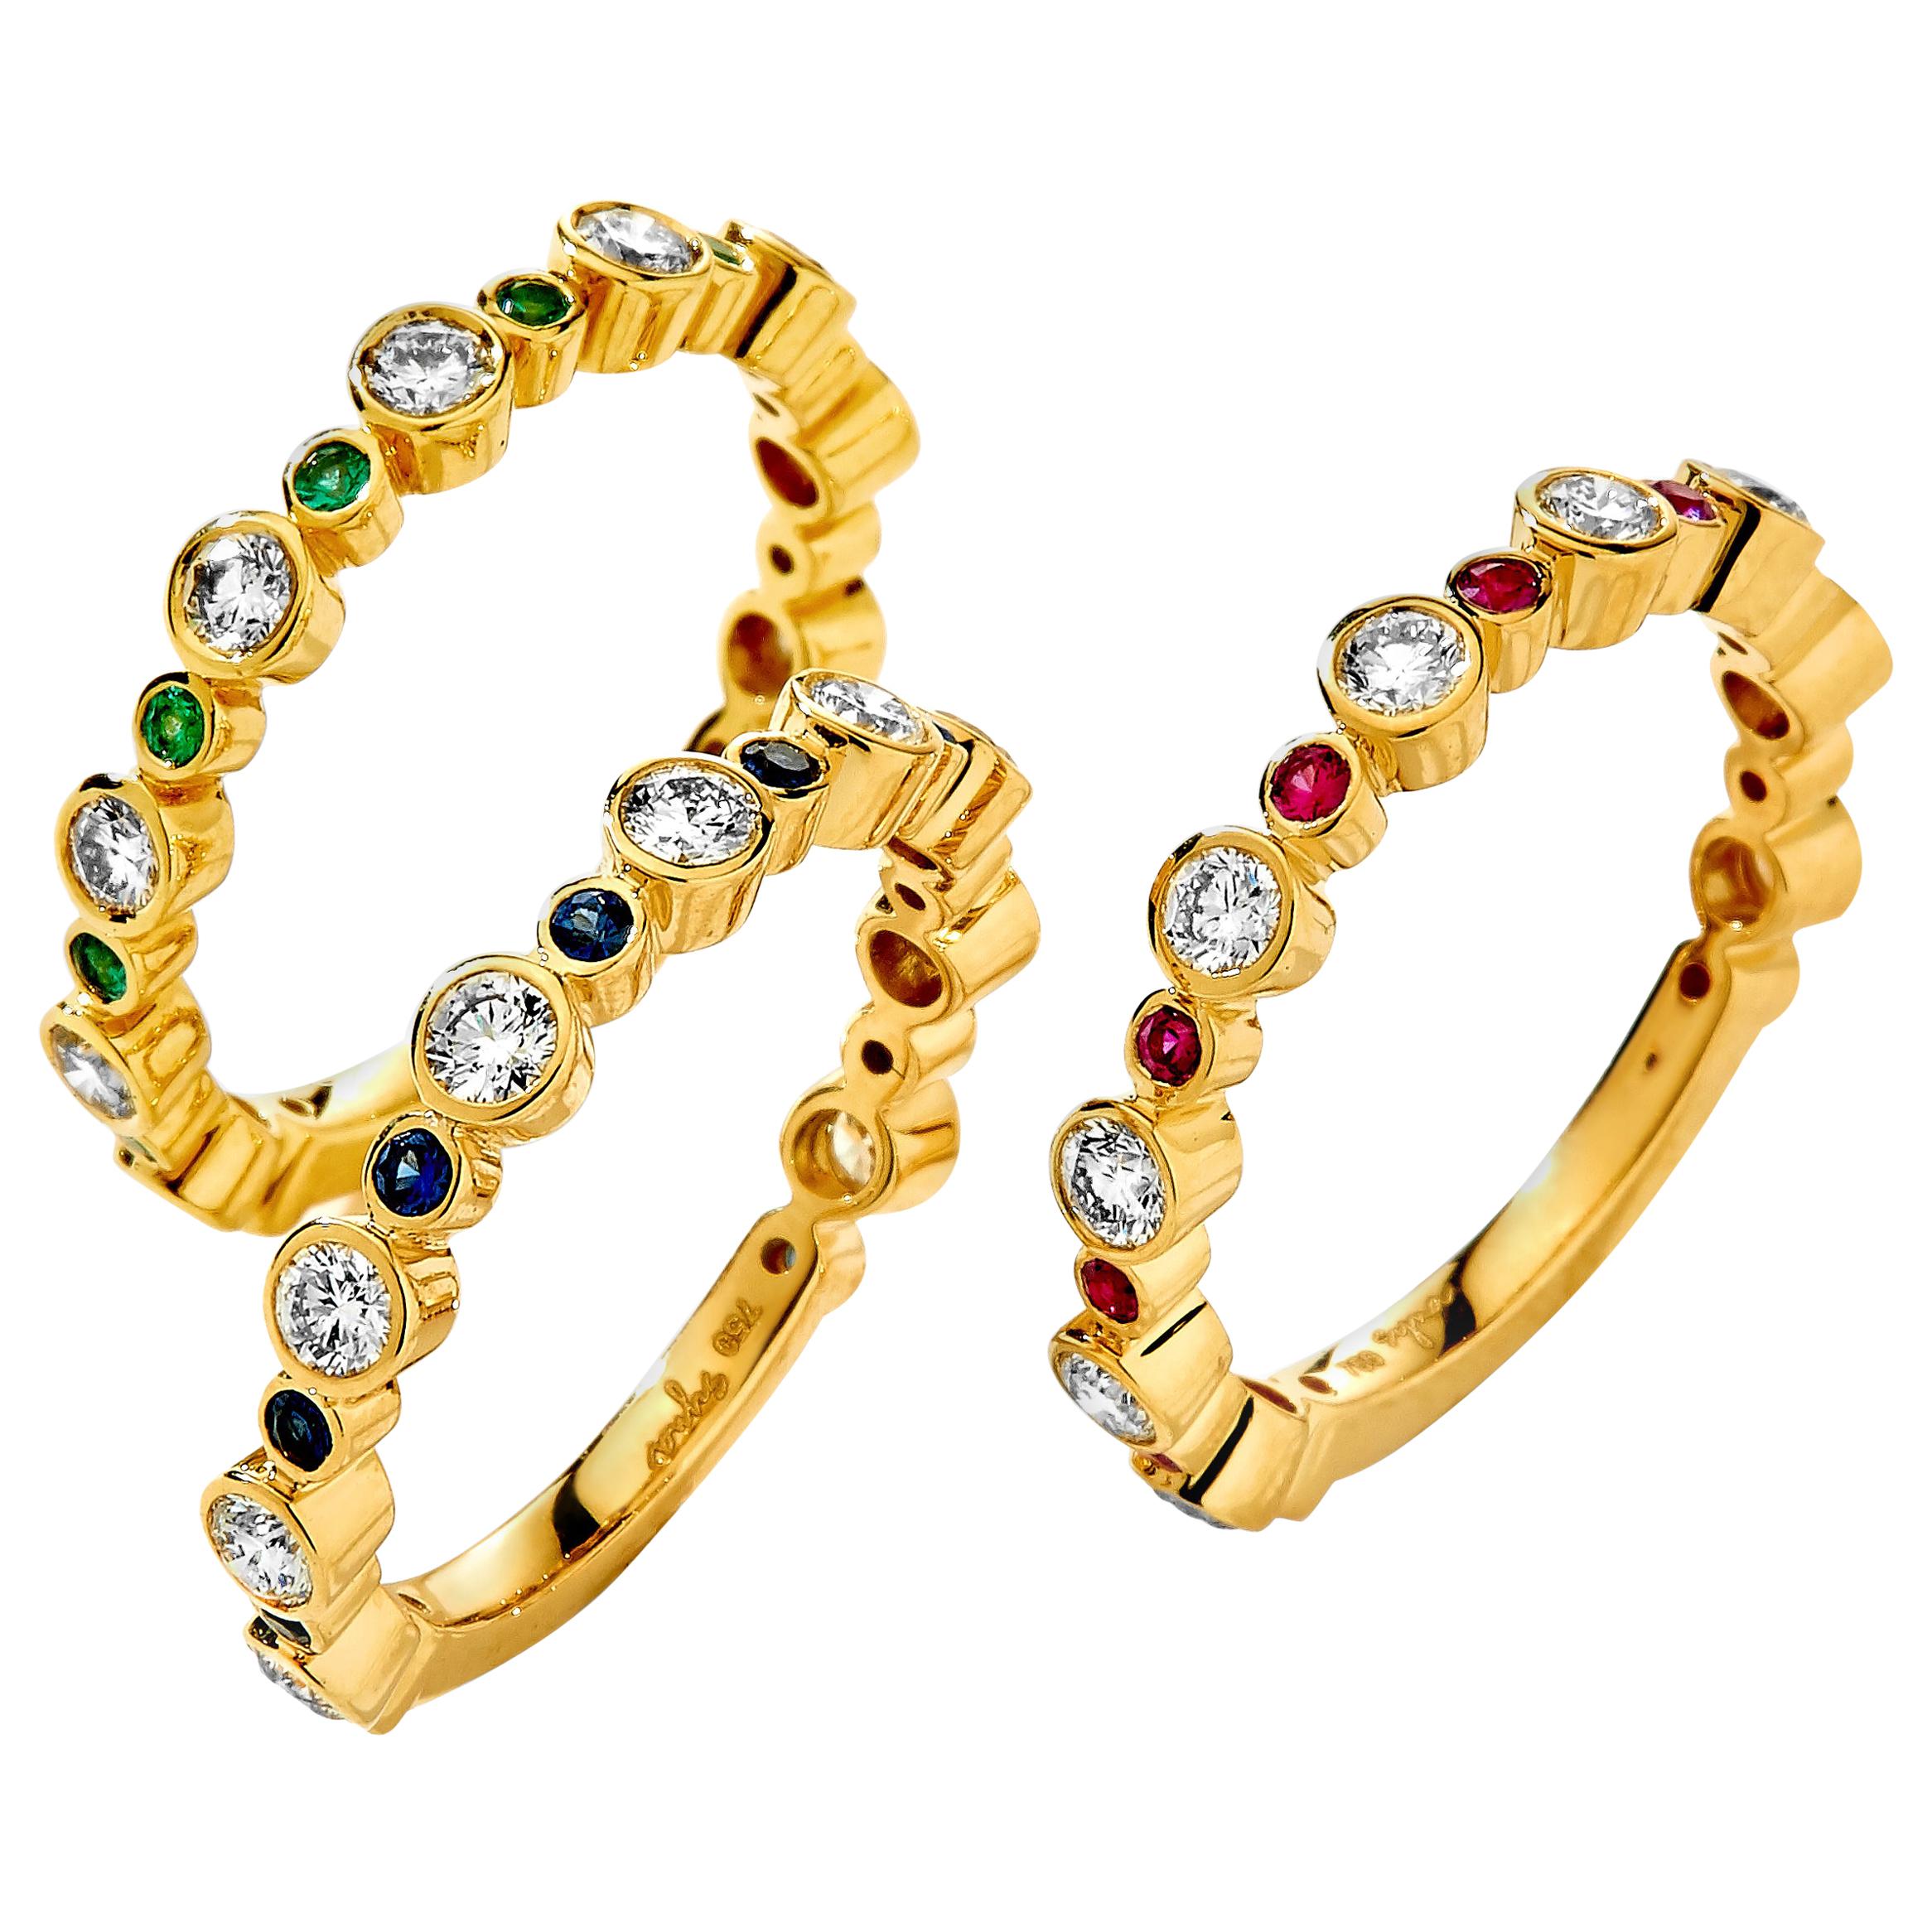 Syna Yellow Gold Bands with Emerald, Ruby, Sapphire and Diamonds